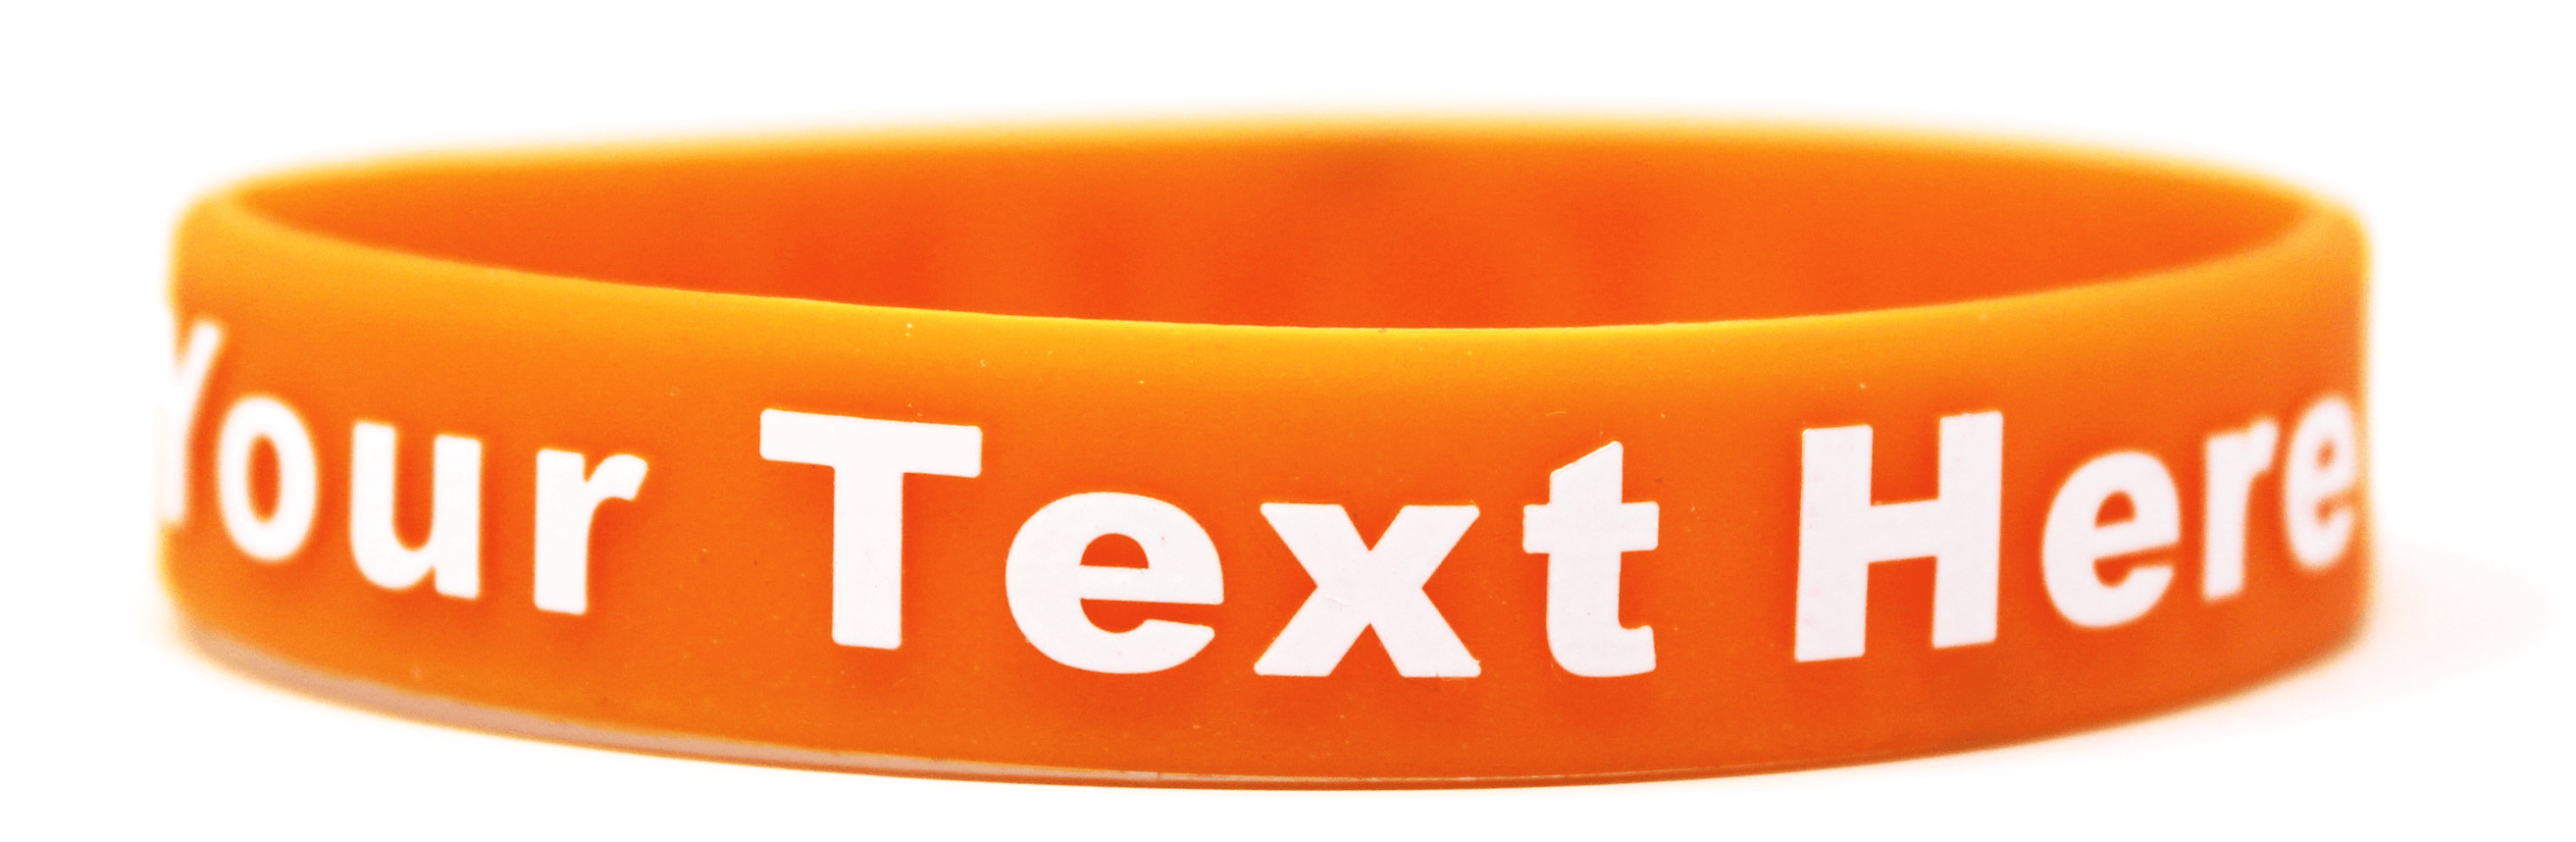 Orange wristband represents ADHD, Kidney Cancer and more.